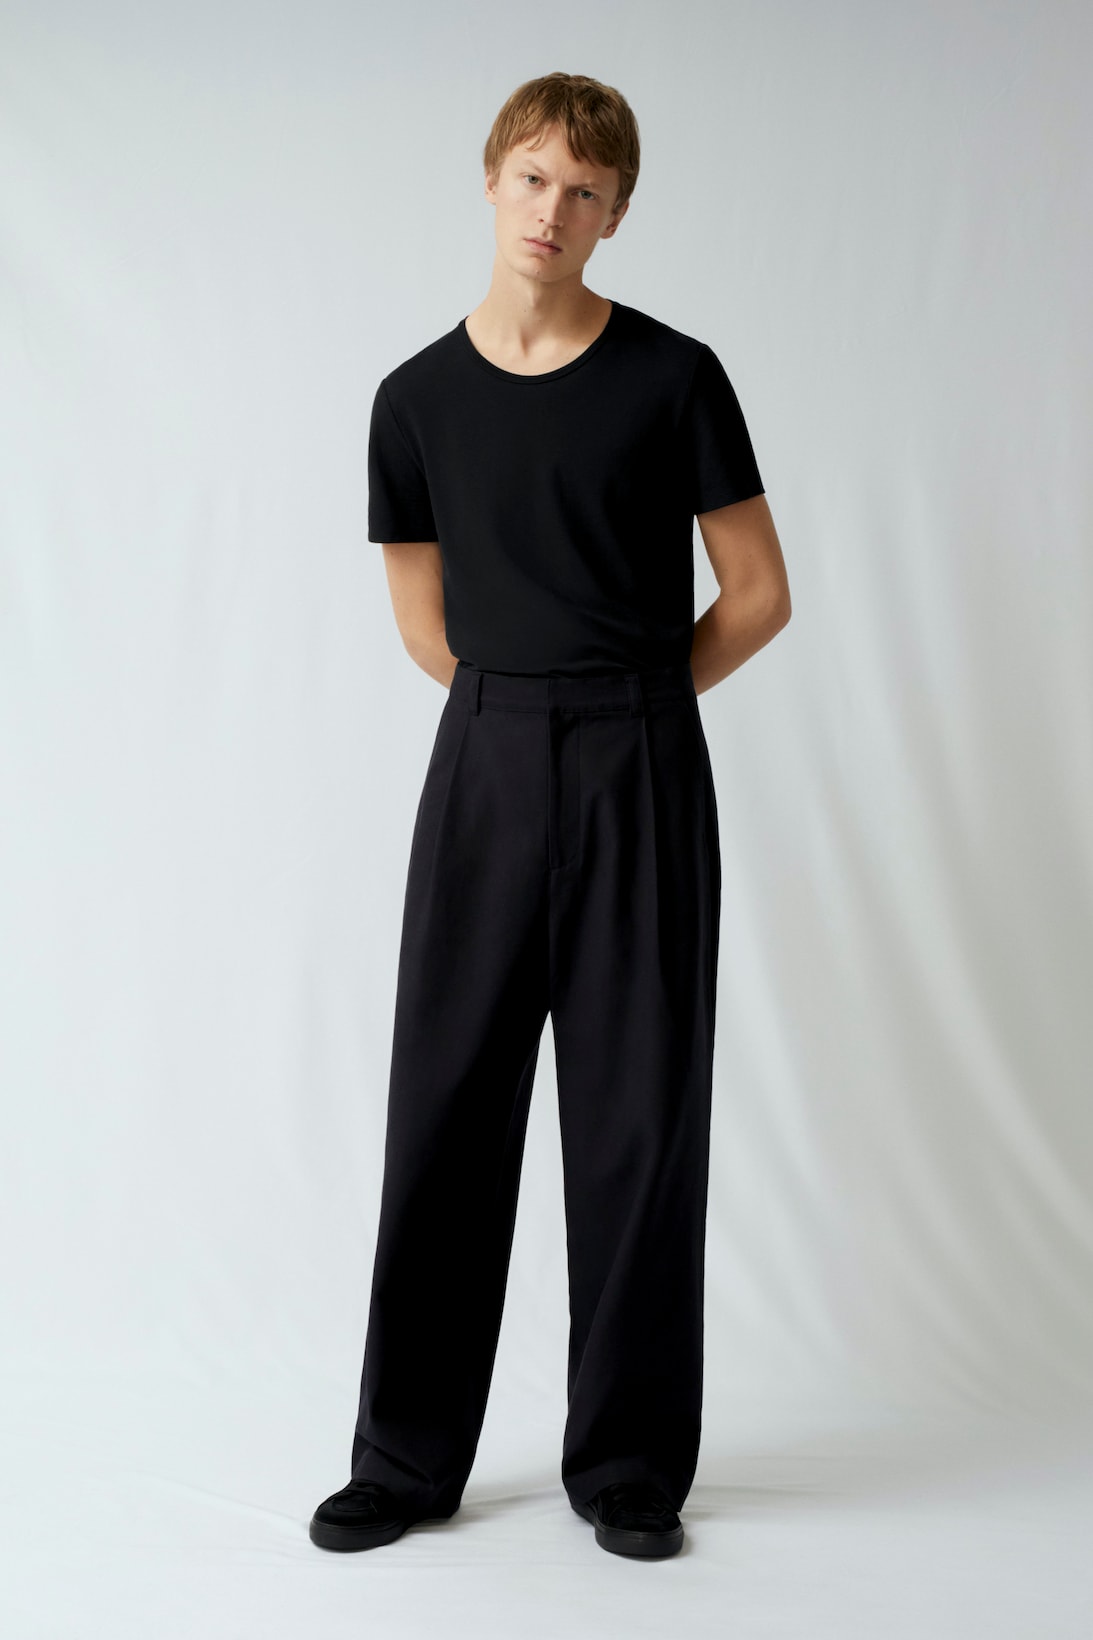 cos spring menswear summer collection lookbook black tee t shirt pants shoes